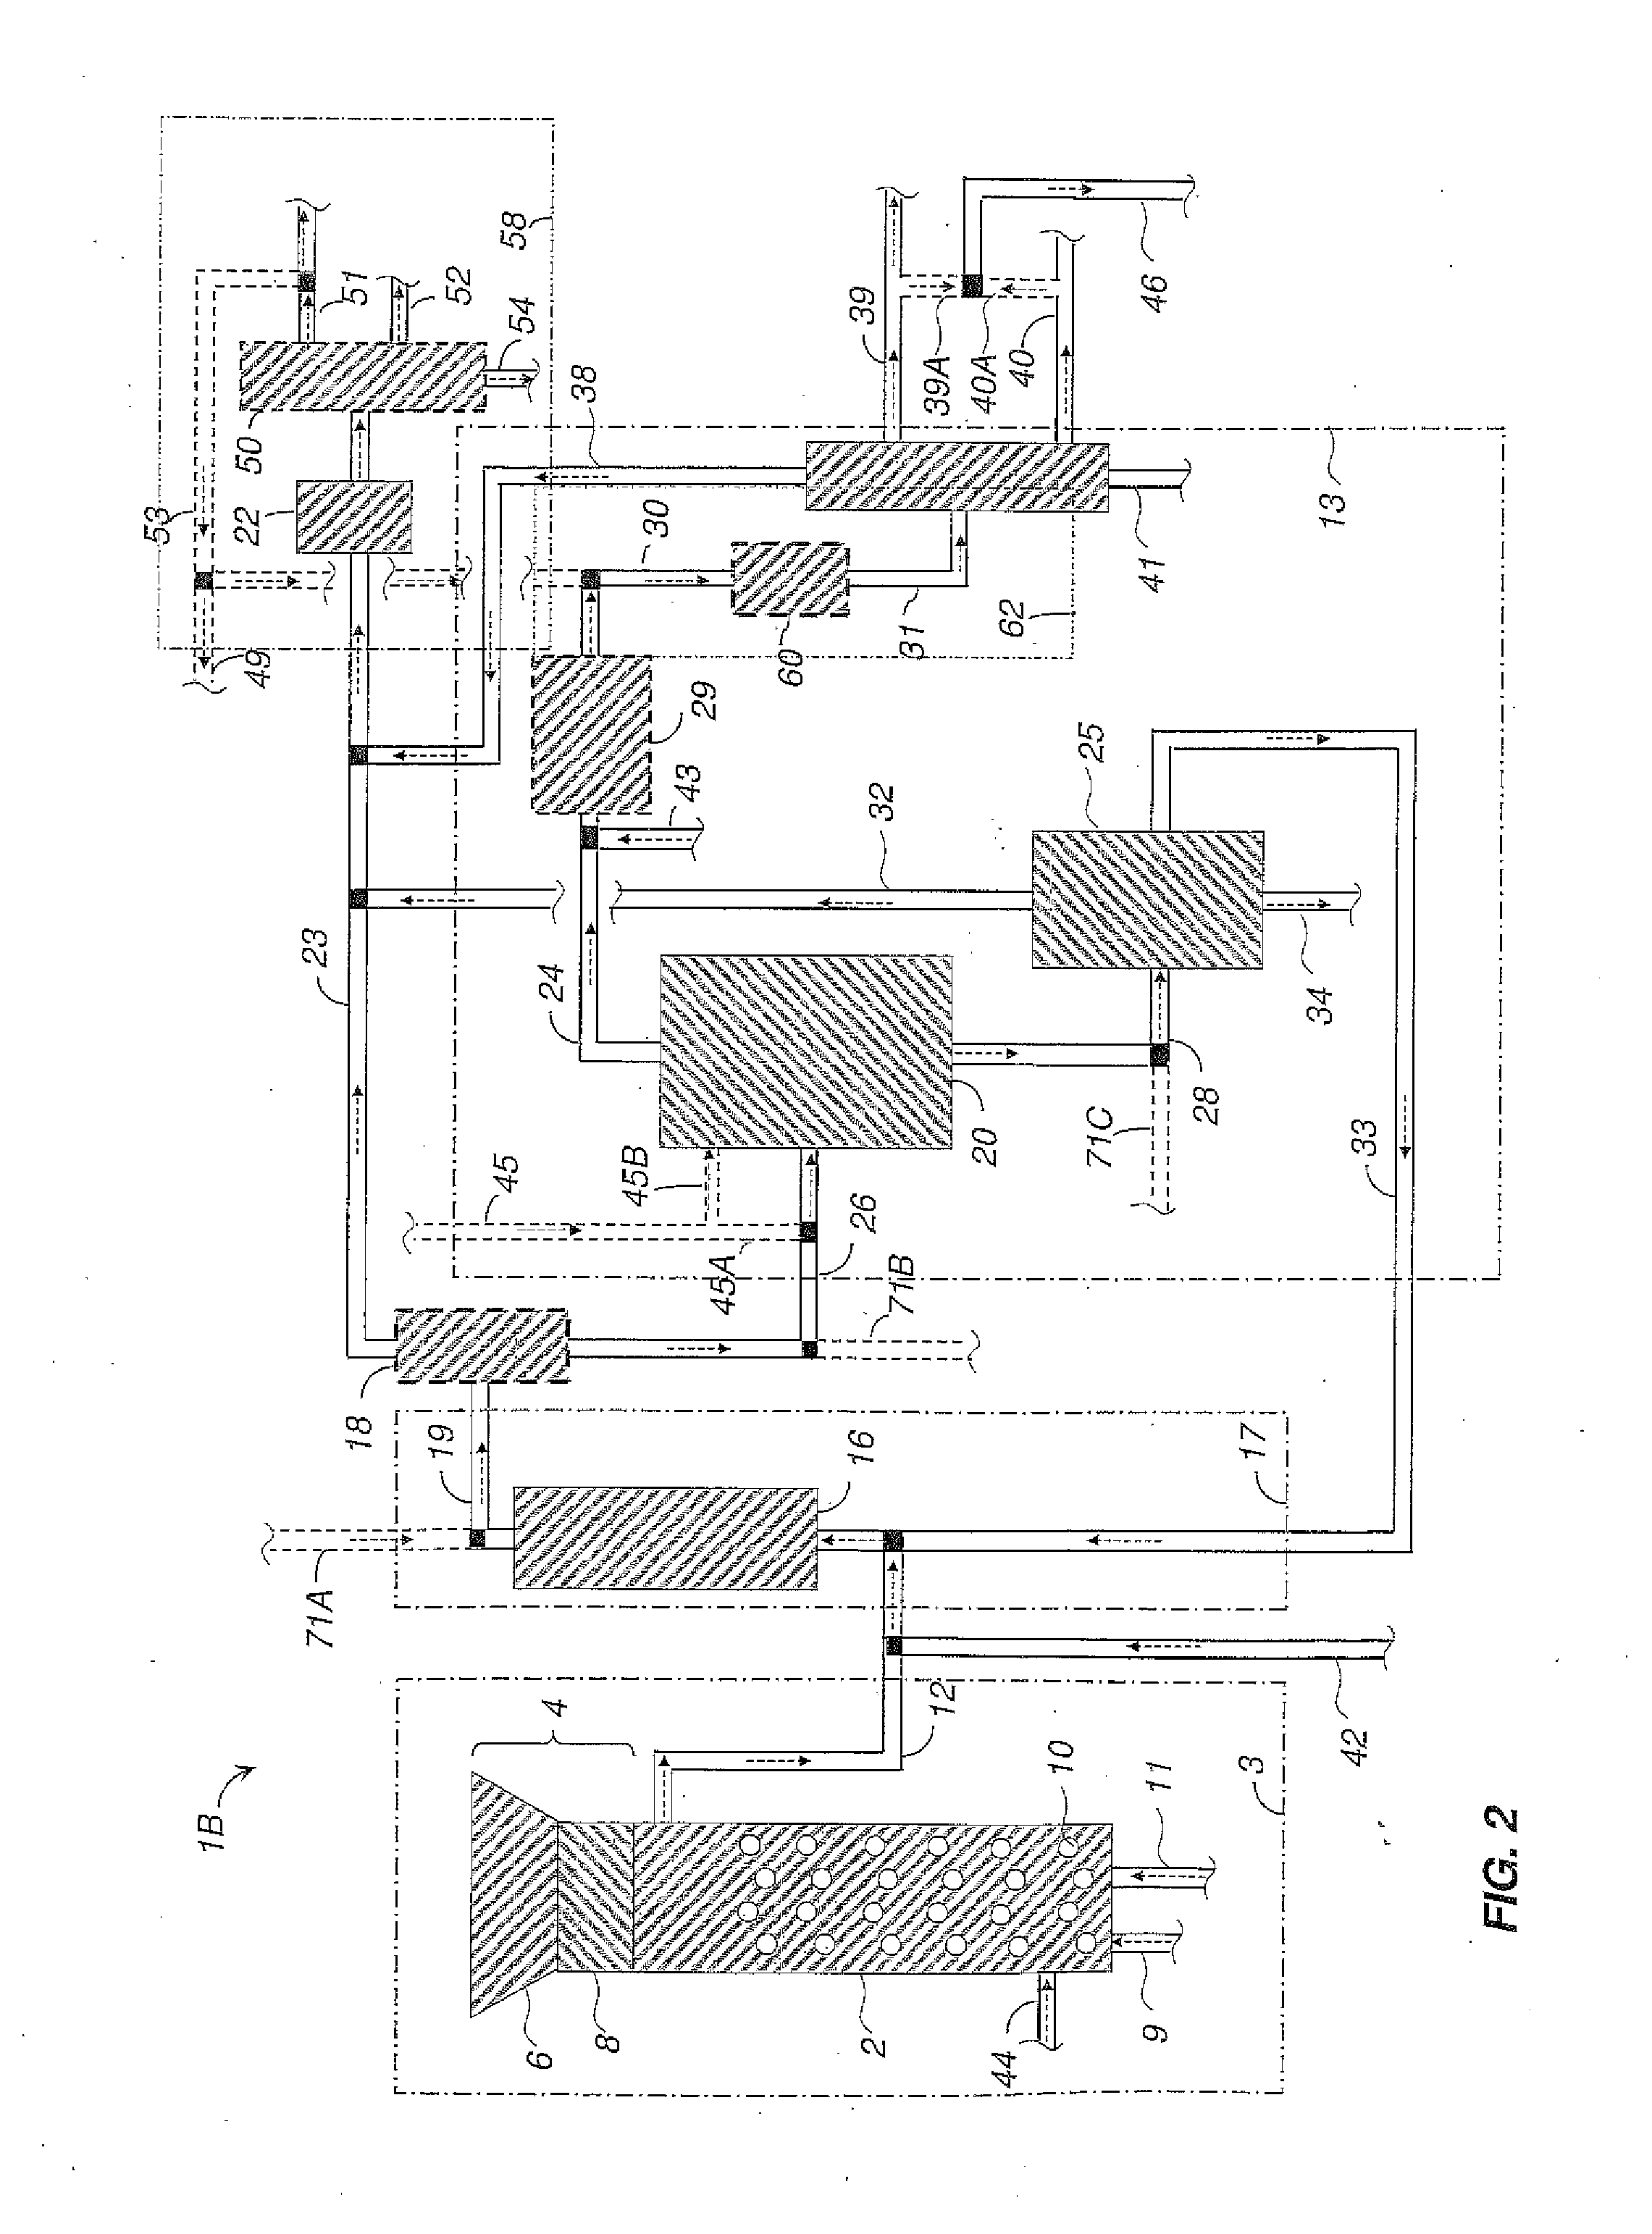 Methods and systems for processing cellulosic biomass